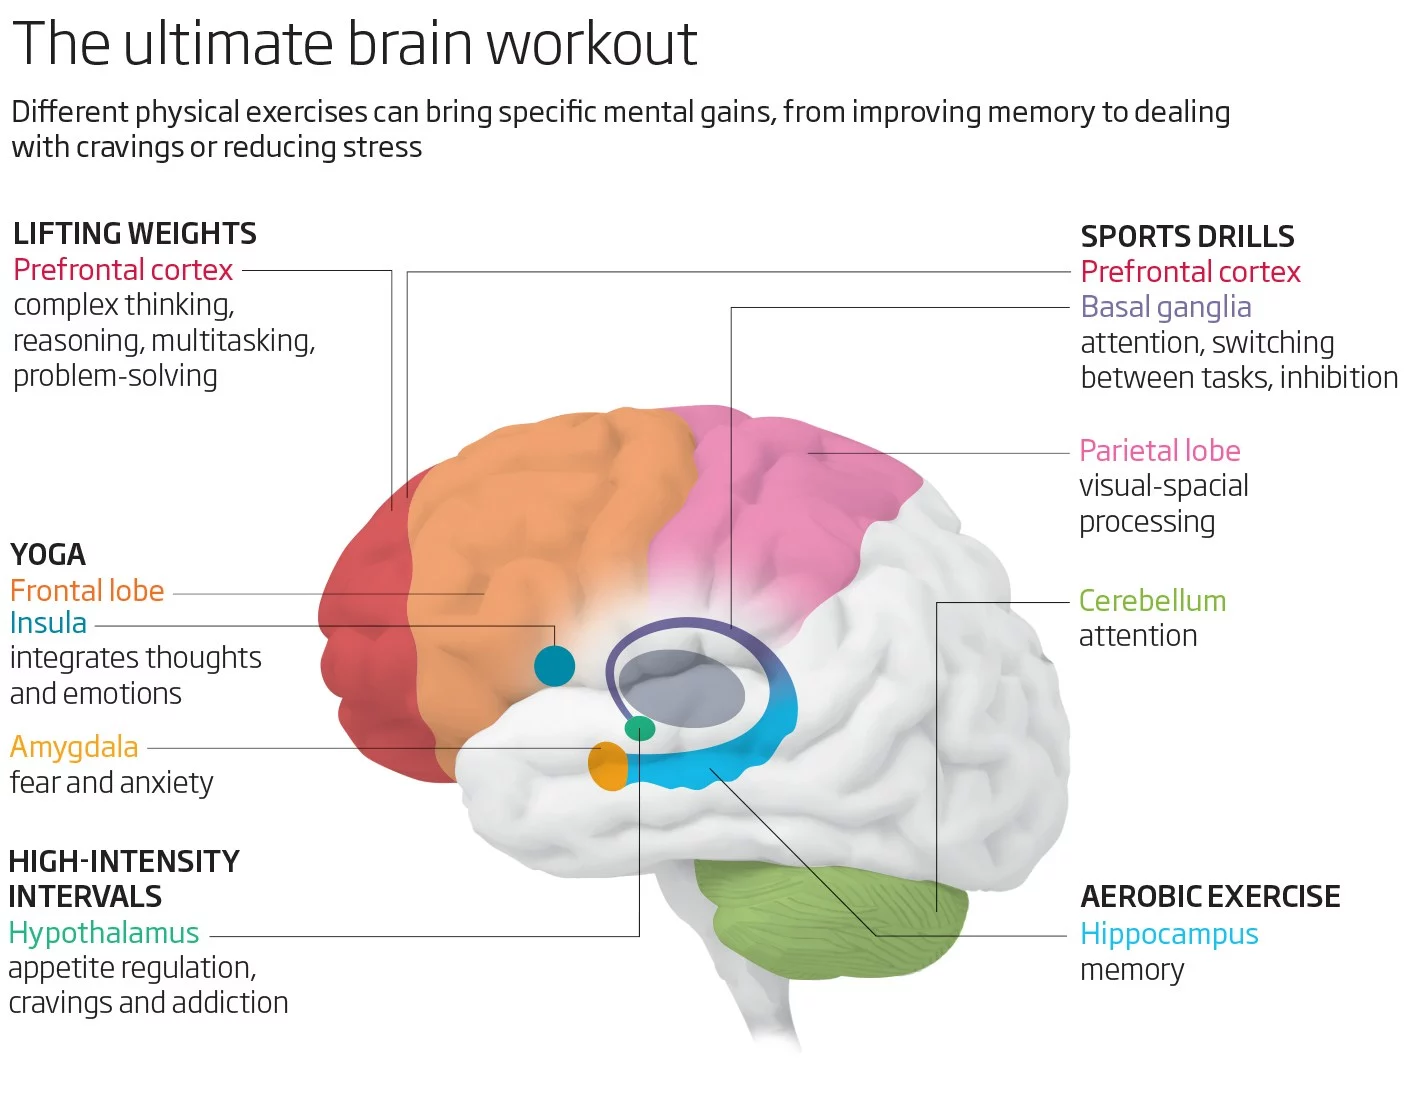 Types of exercise and the brain